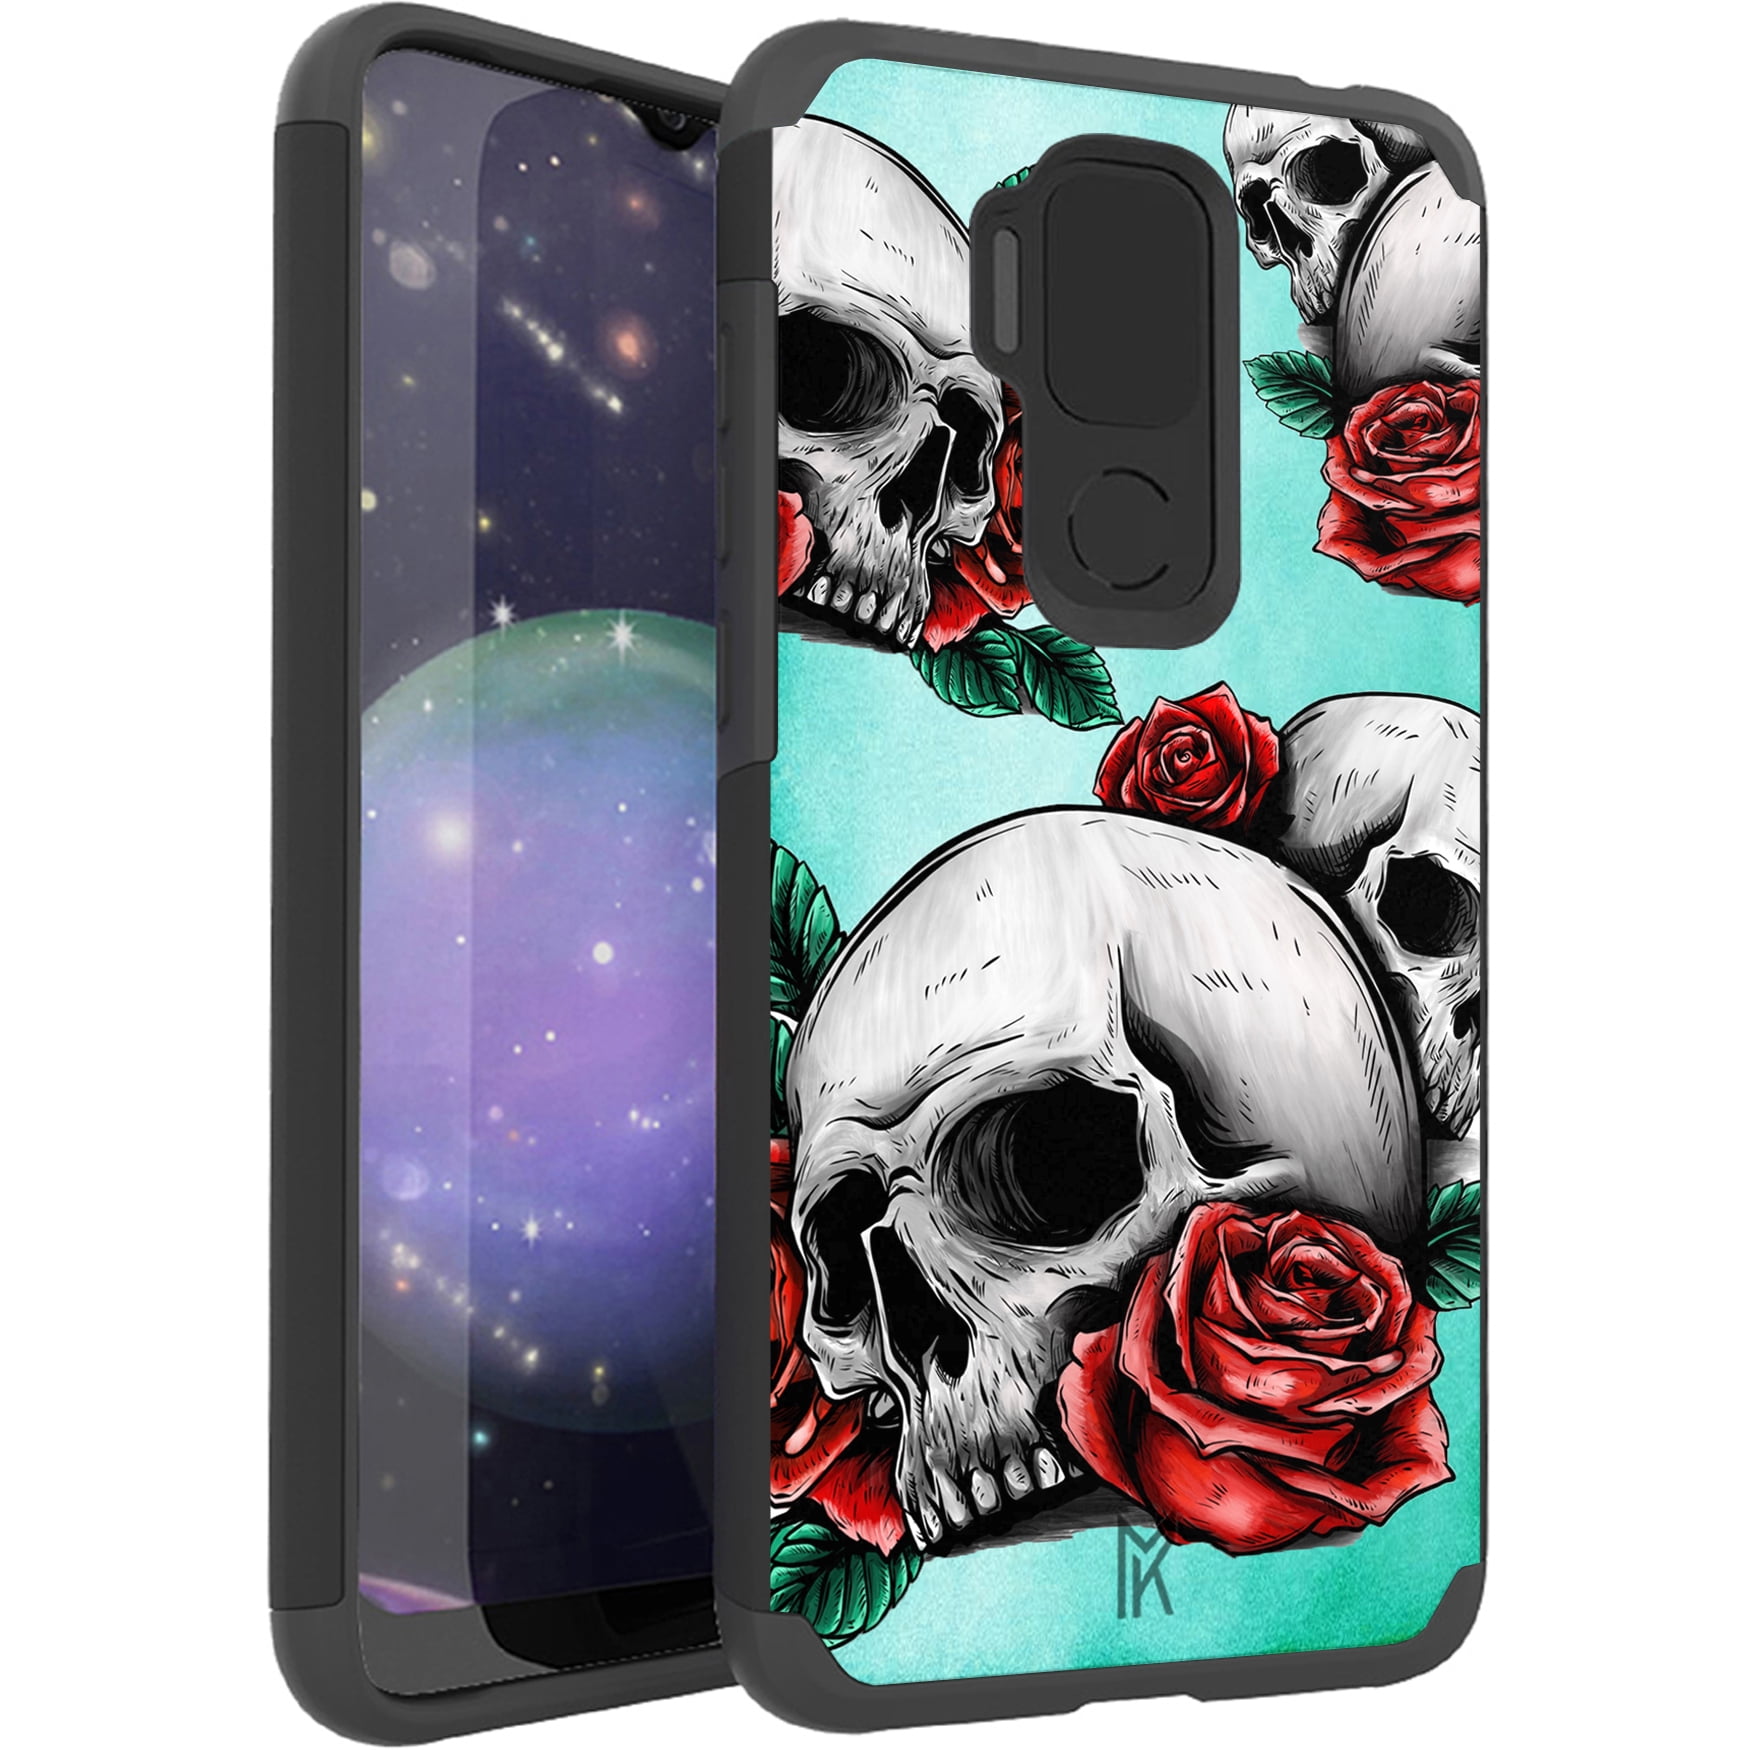 DALUX MetKase Hybrid Slim Phone Case Cover Phone Case Compatible with Cricket Influence / AT&T Maestro Plus (V350U) - Teal Skull Romance